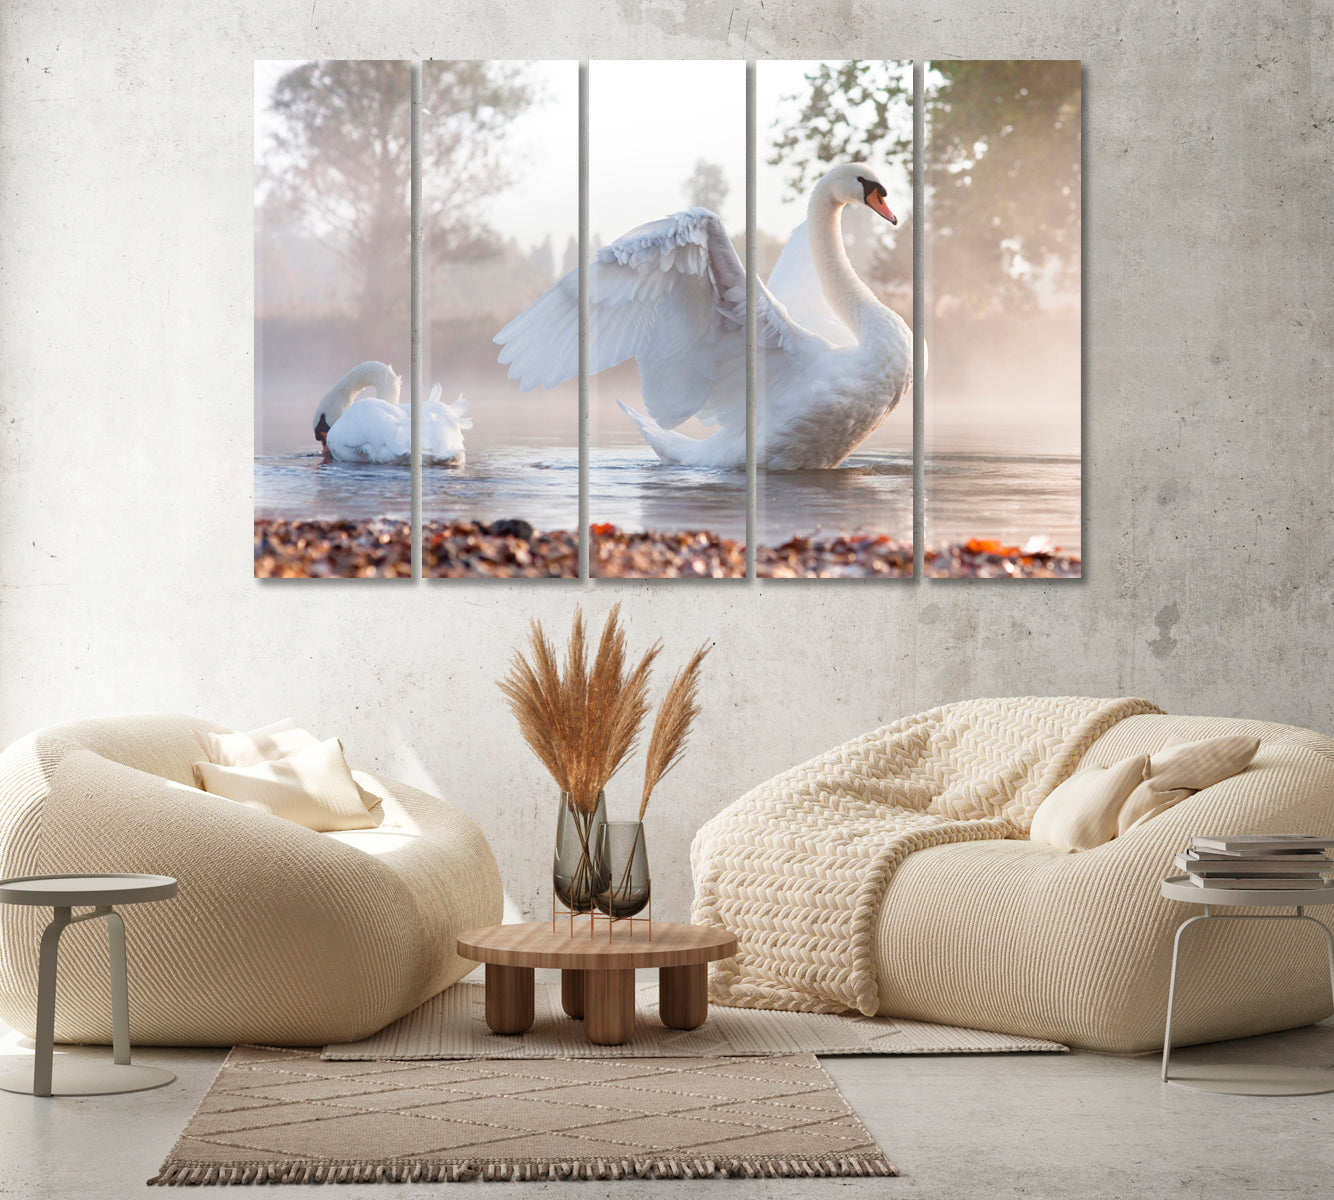 White Swan on Foggy Lake Canvas Print ArtLexy 5 Panels 36"x24" inches 